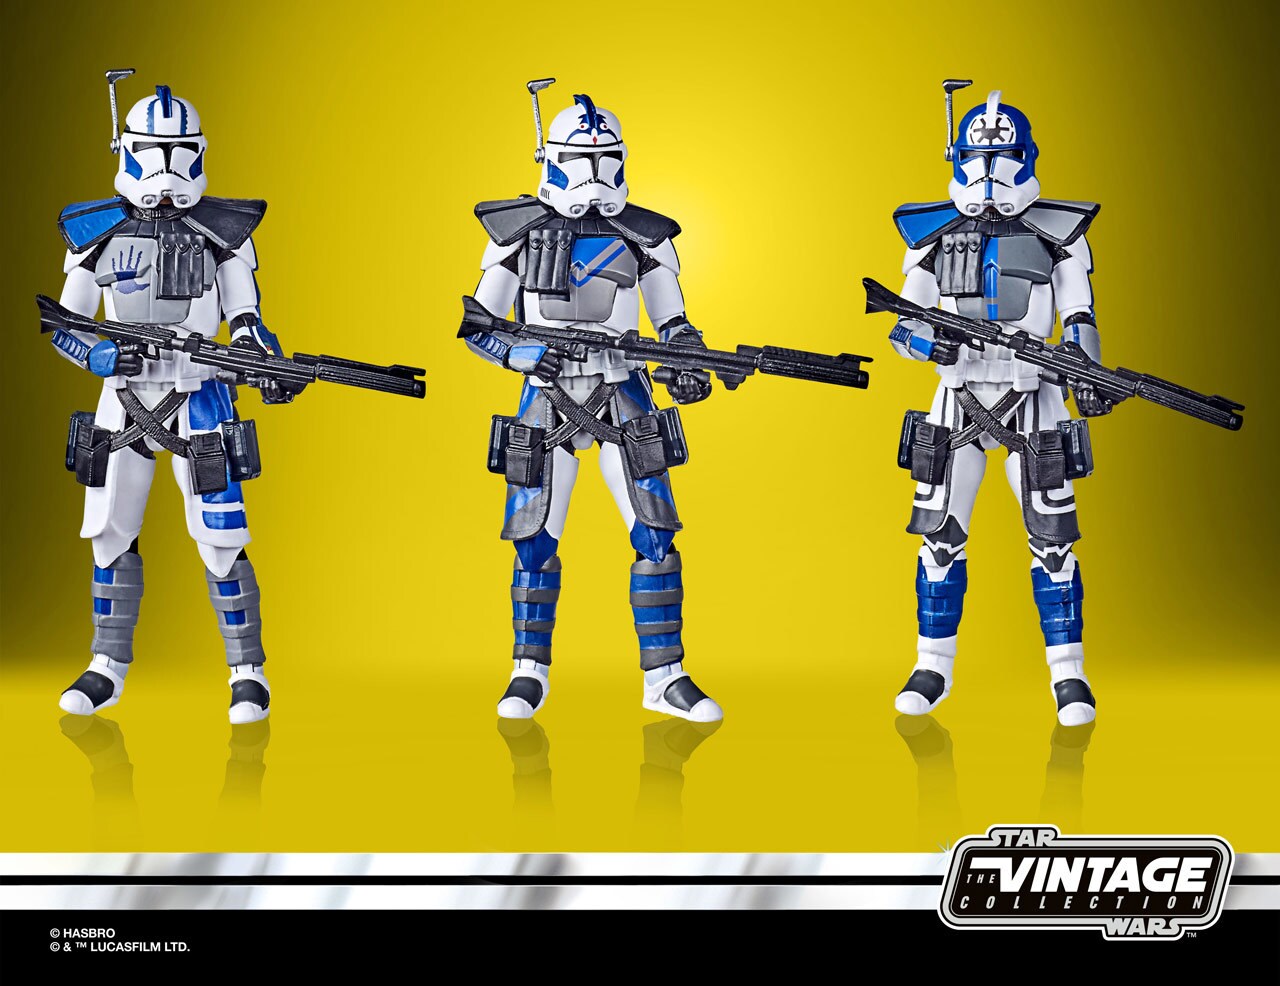 Star Wars: The Vintage Collection Star Wars: The Clone Wars 501st Legion ARC Troopers Figure 3-Pack